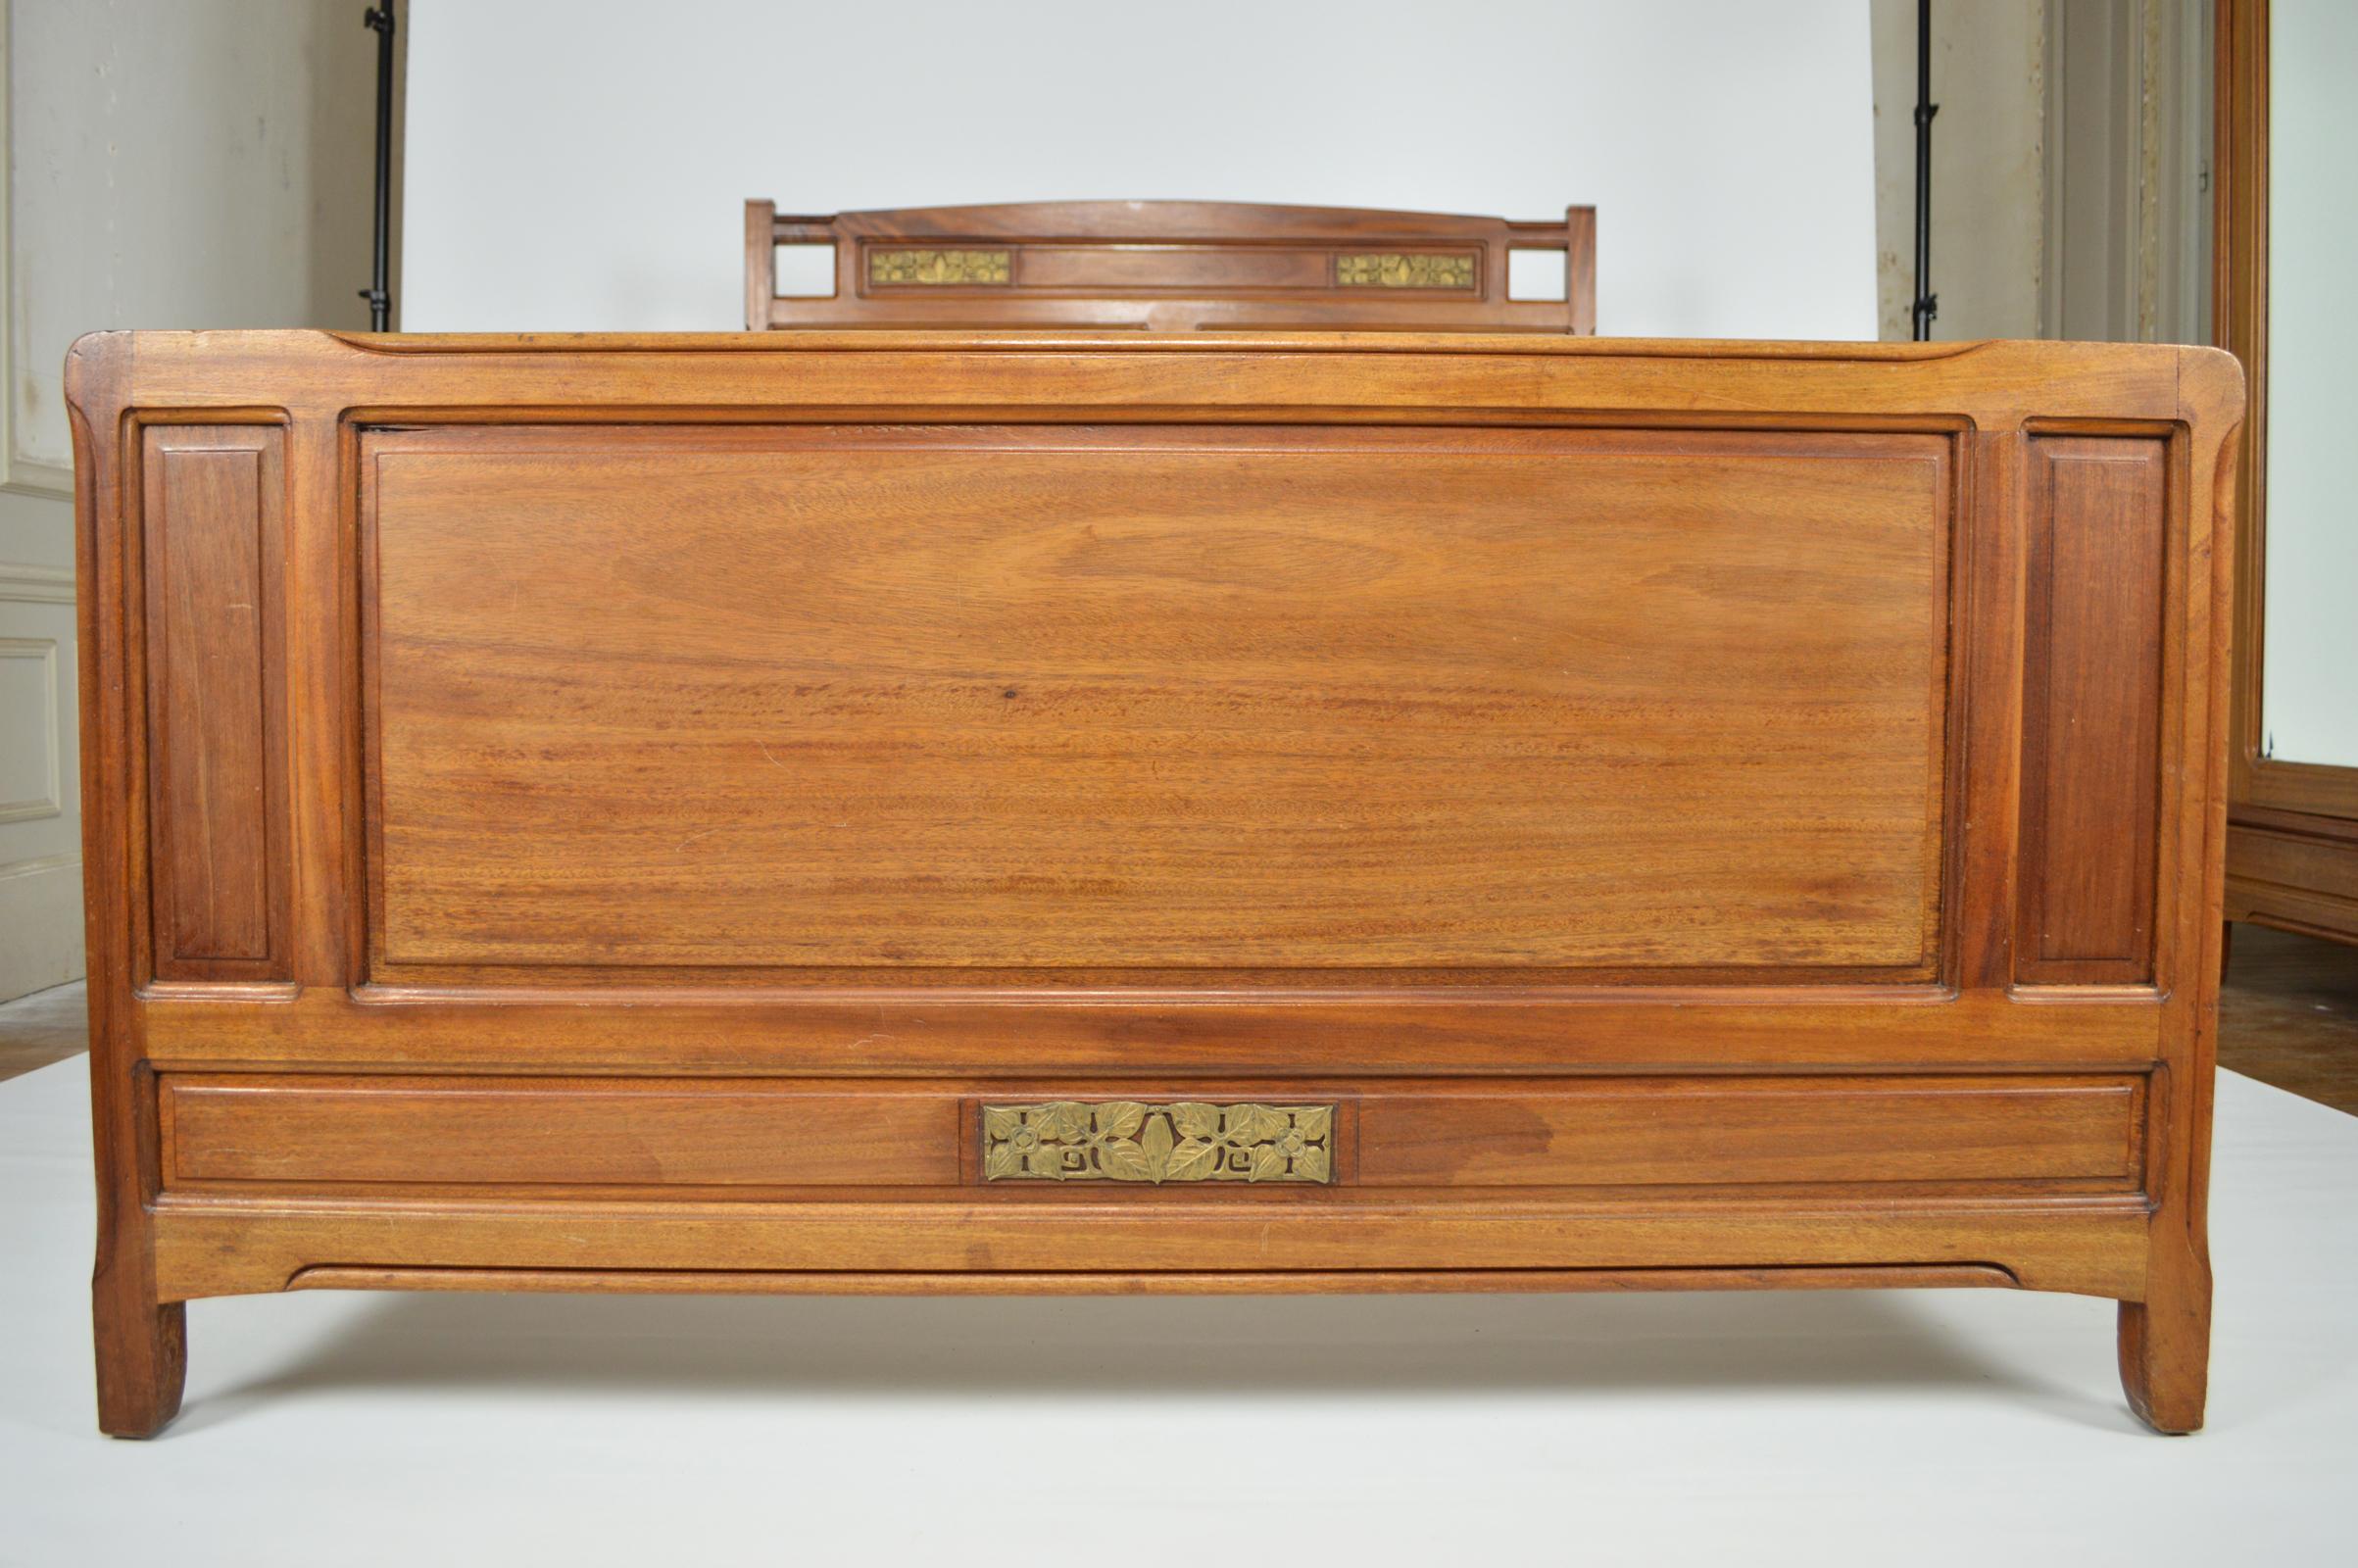 French Art Nouveau Mahogany Clematis Bedroom Set by Mathieu Gallerey, circa 1920 For Sale 9